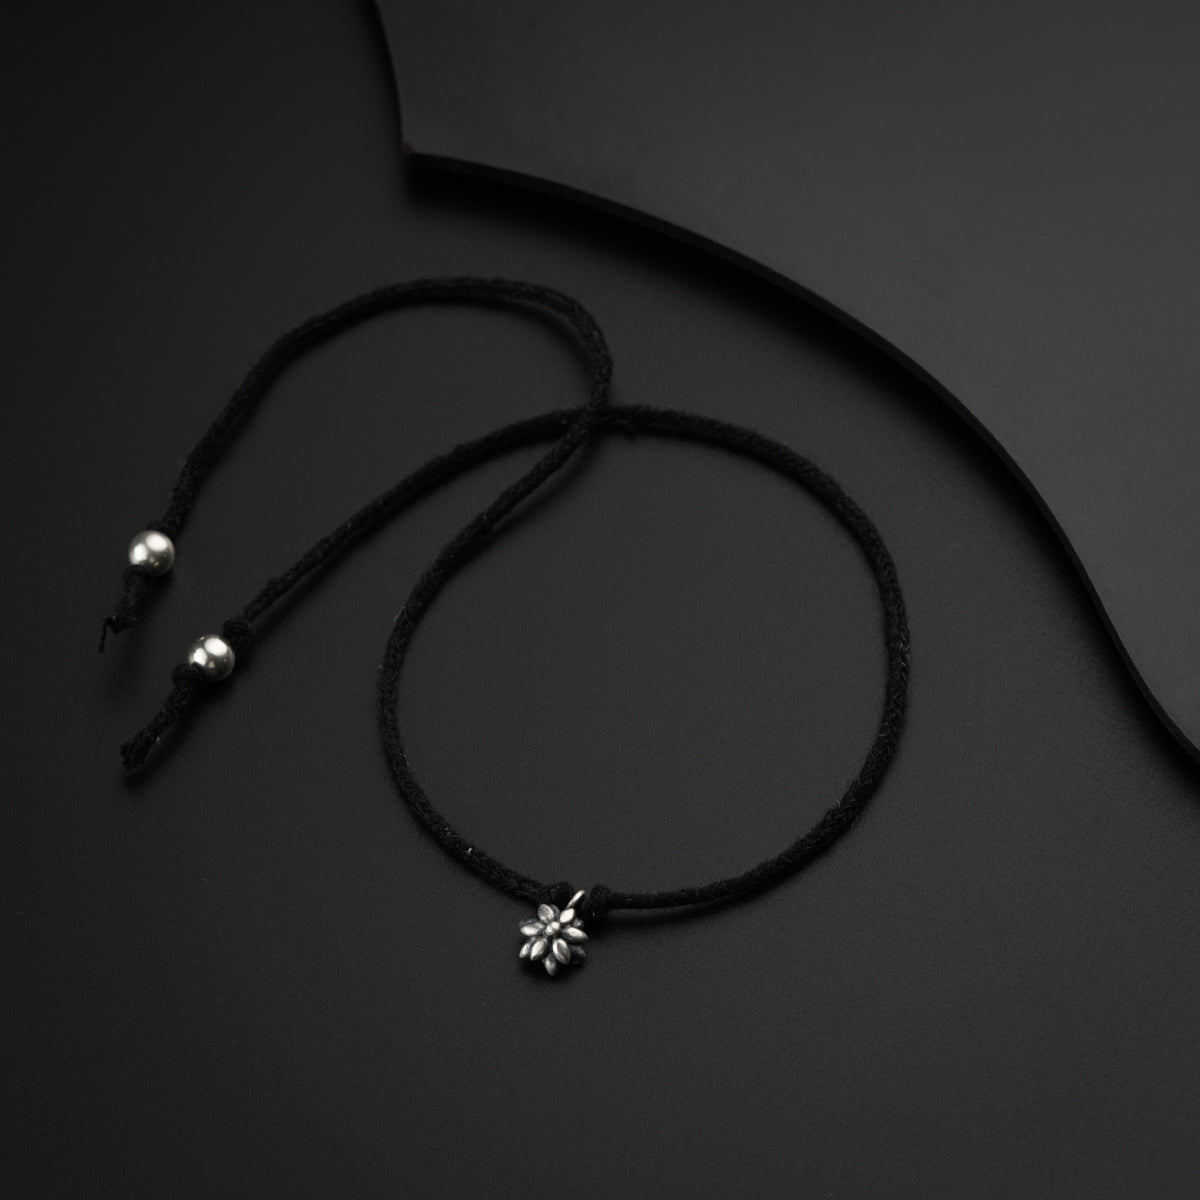 a black cord with a silver flower on it